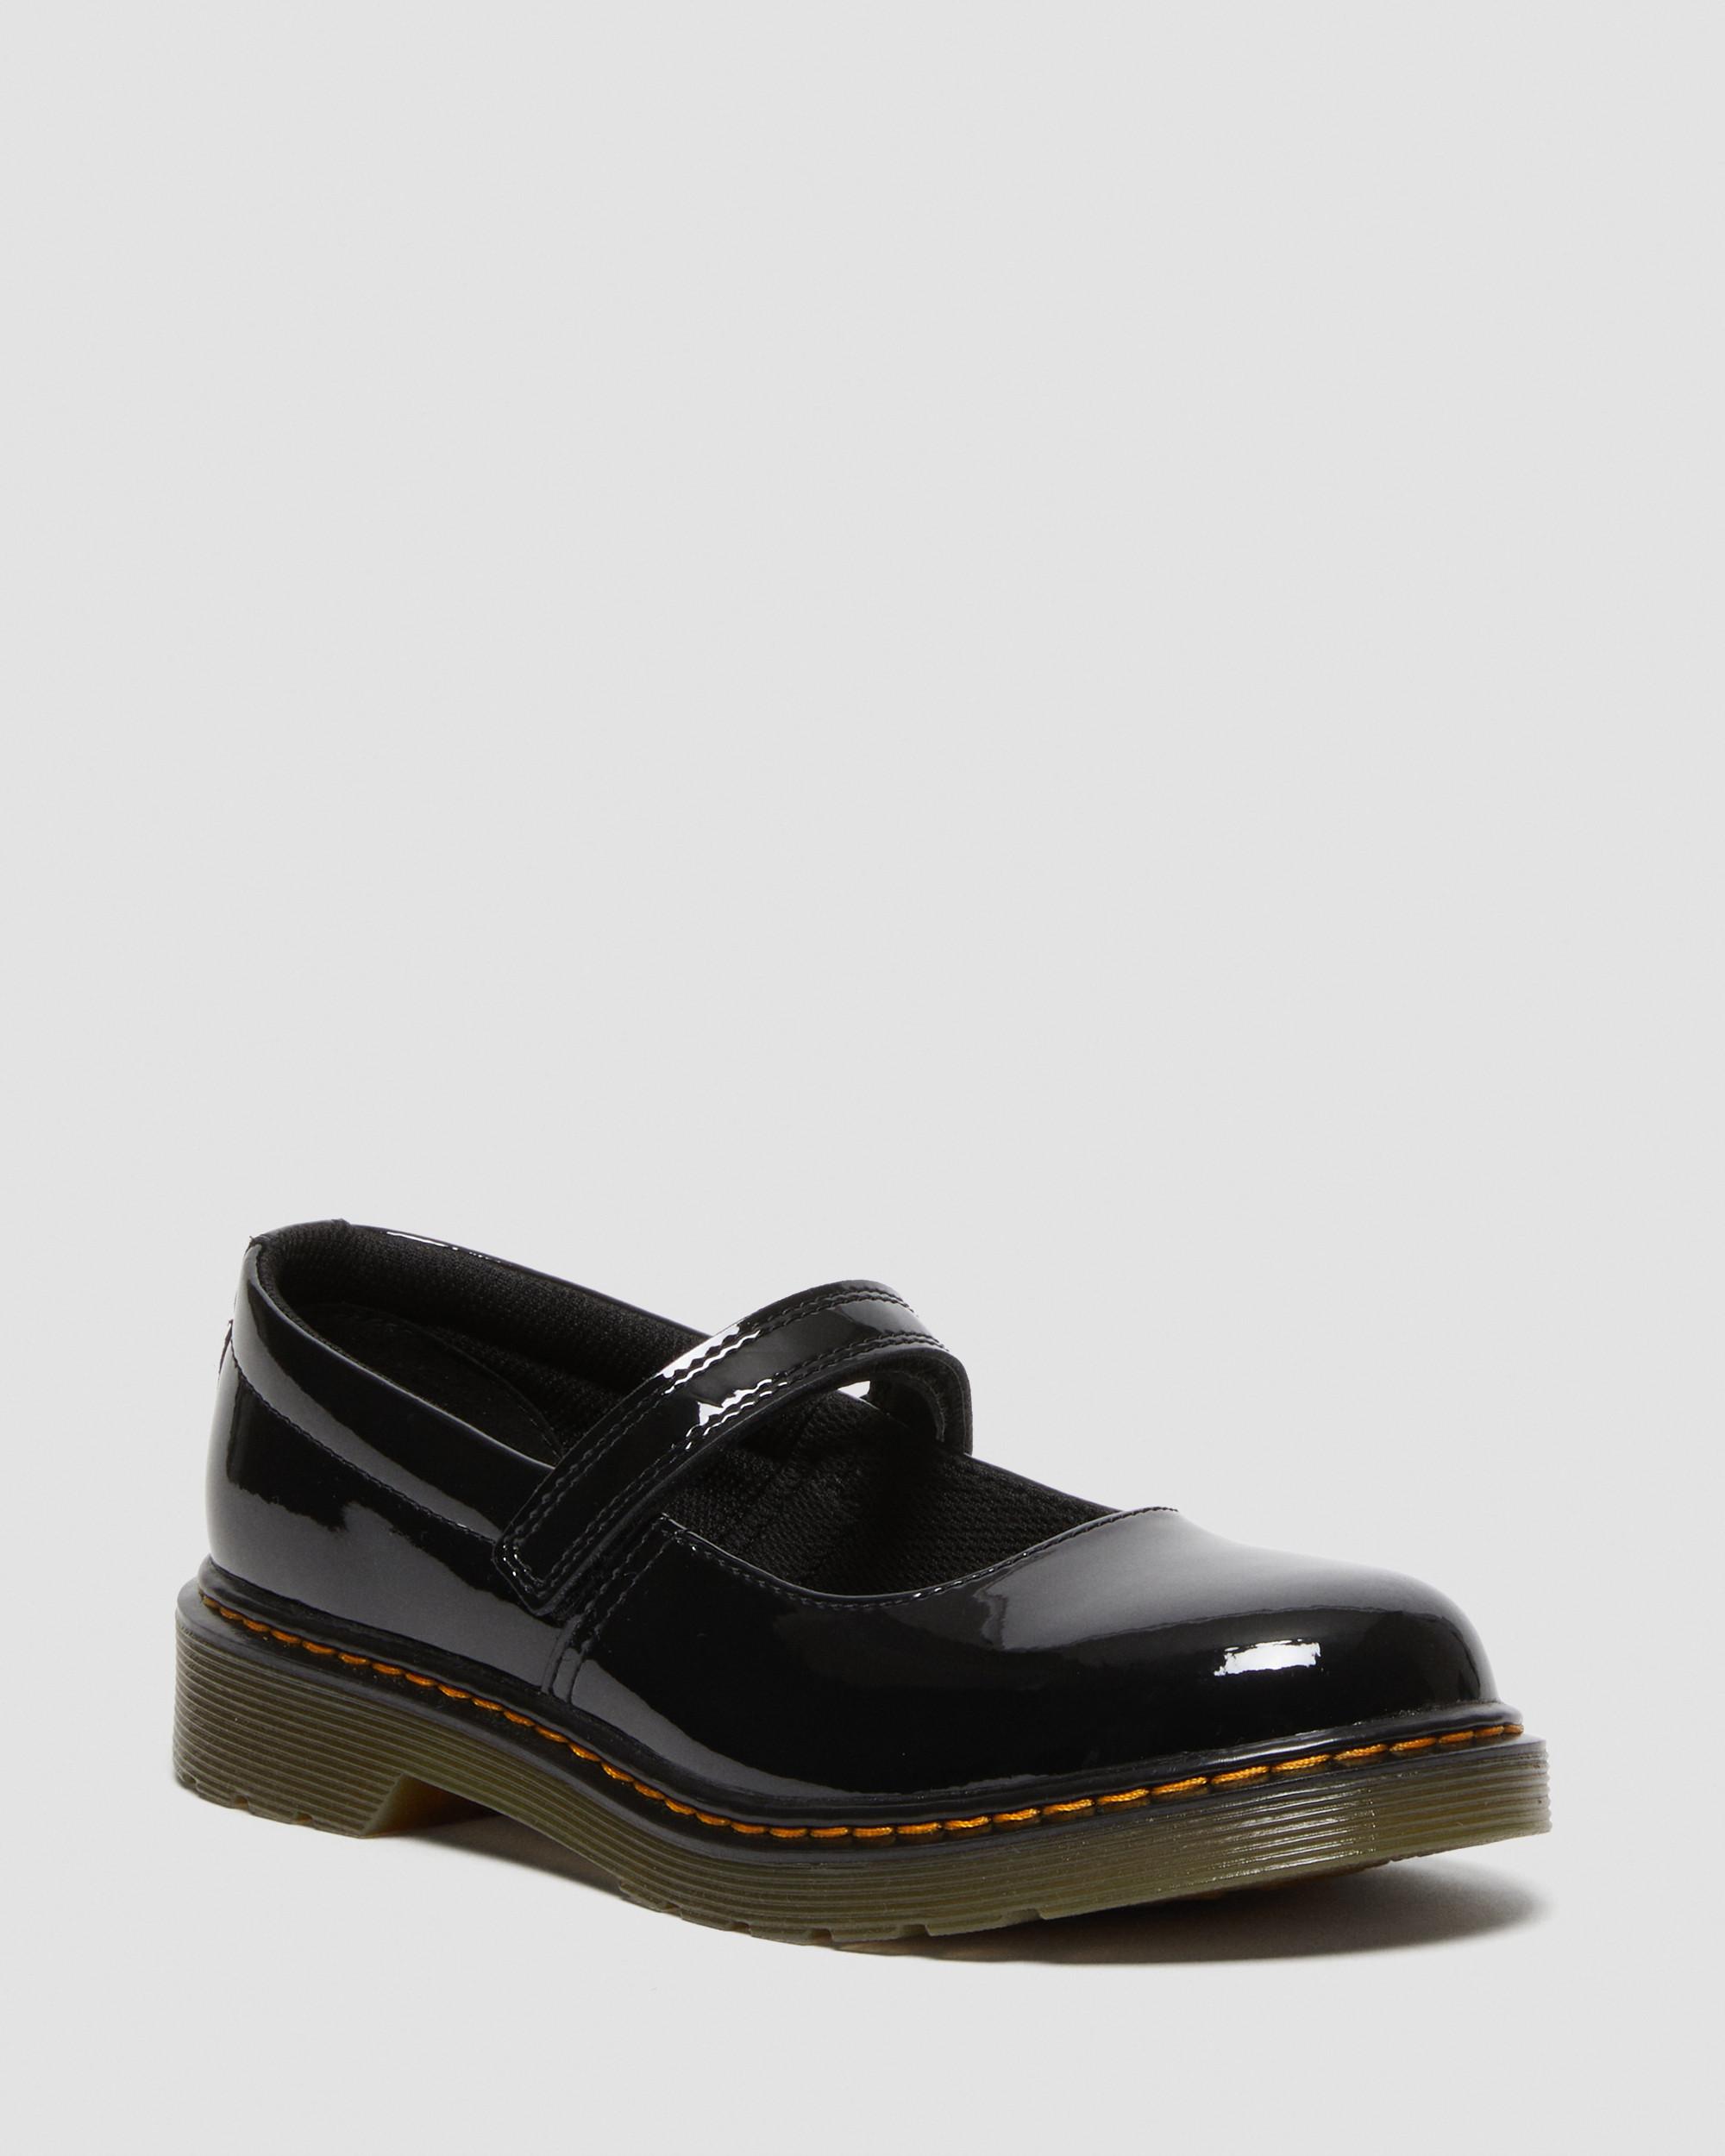 Youth Maccy Patent Leather Mary Jane Shoes, Black | Dr. Martens